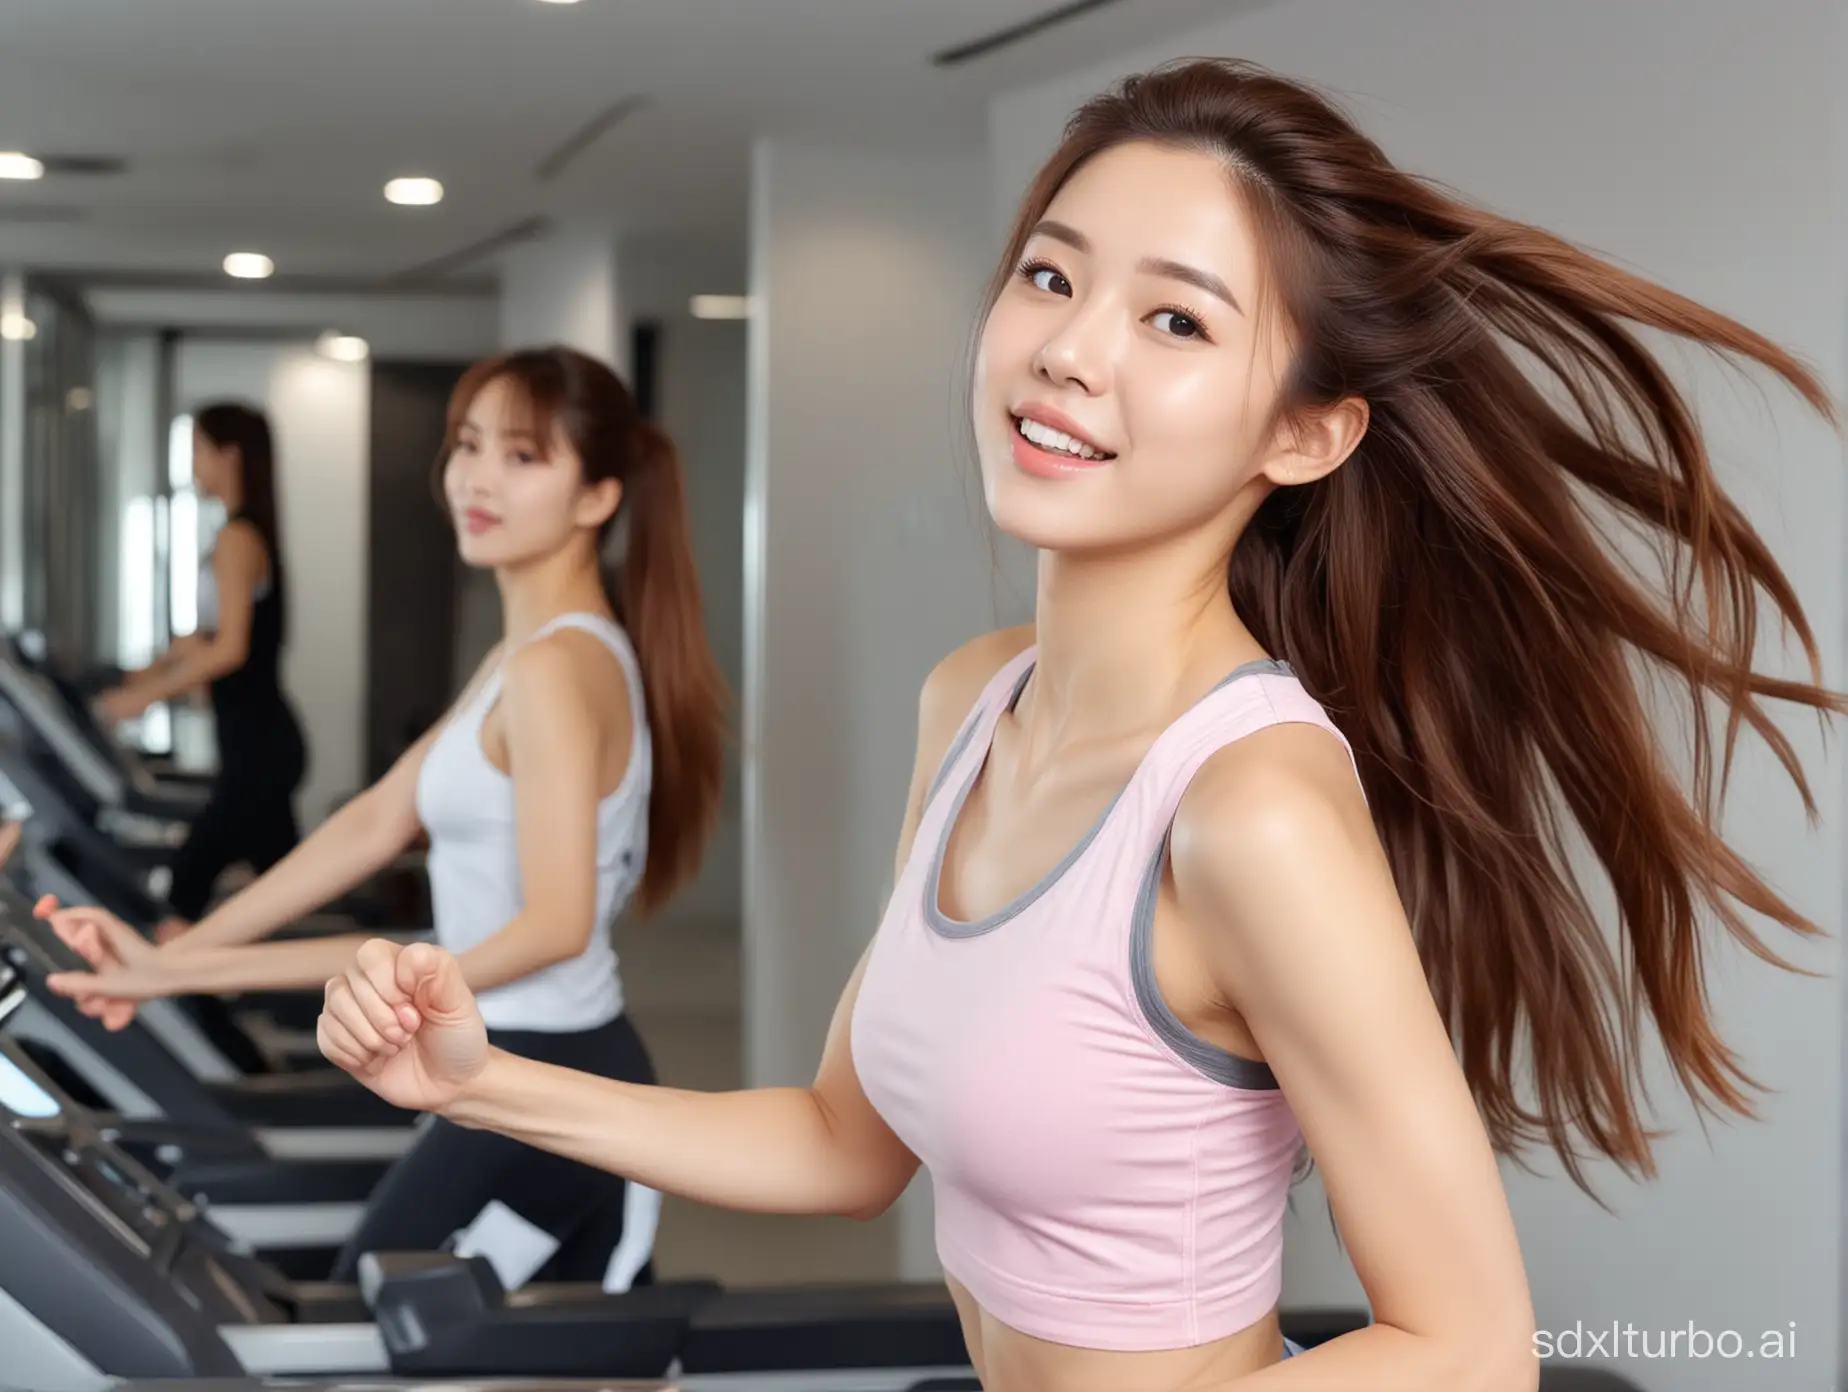 Beautiful long-haired girl with Korean idol face running on treadmill, side view